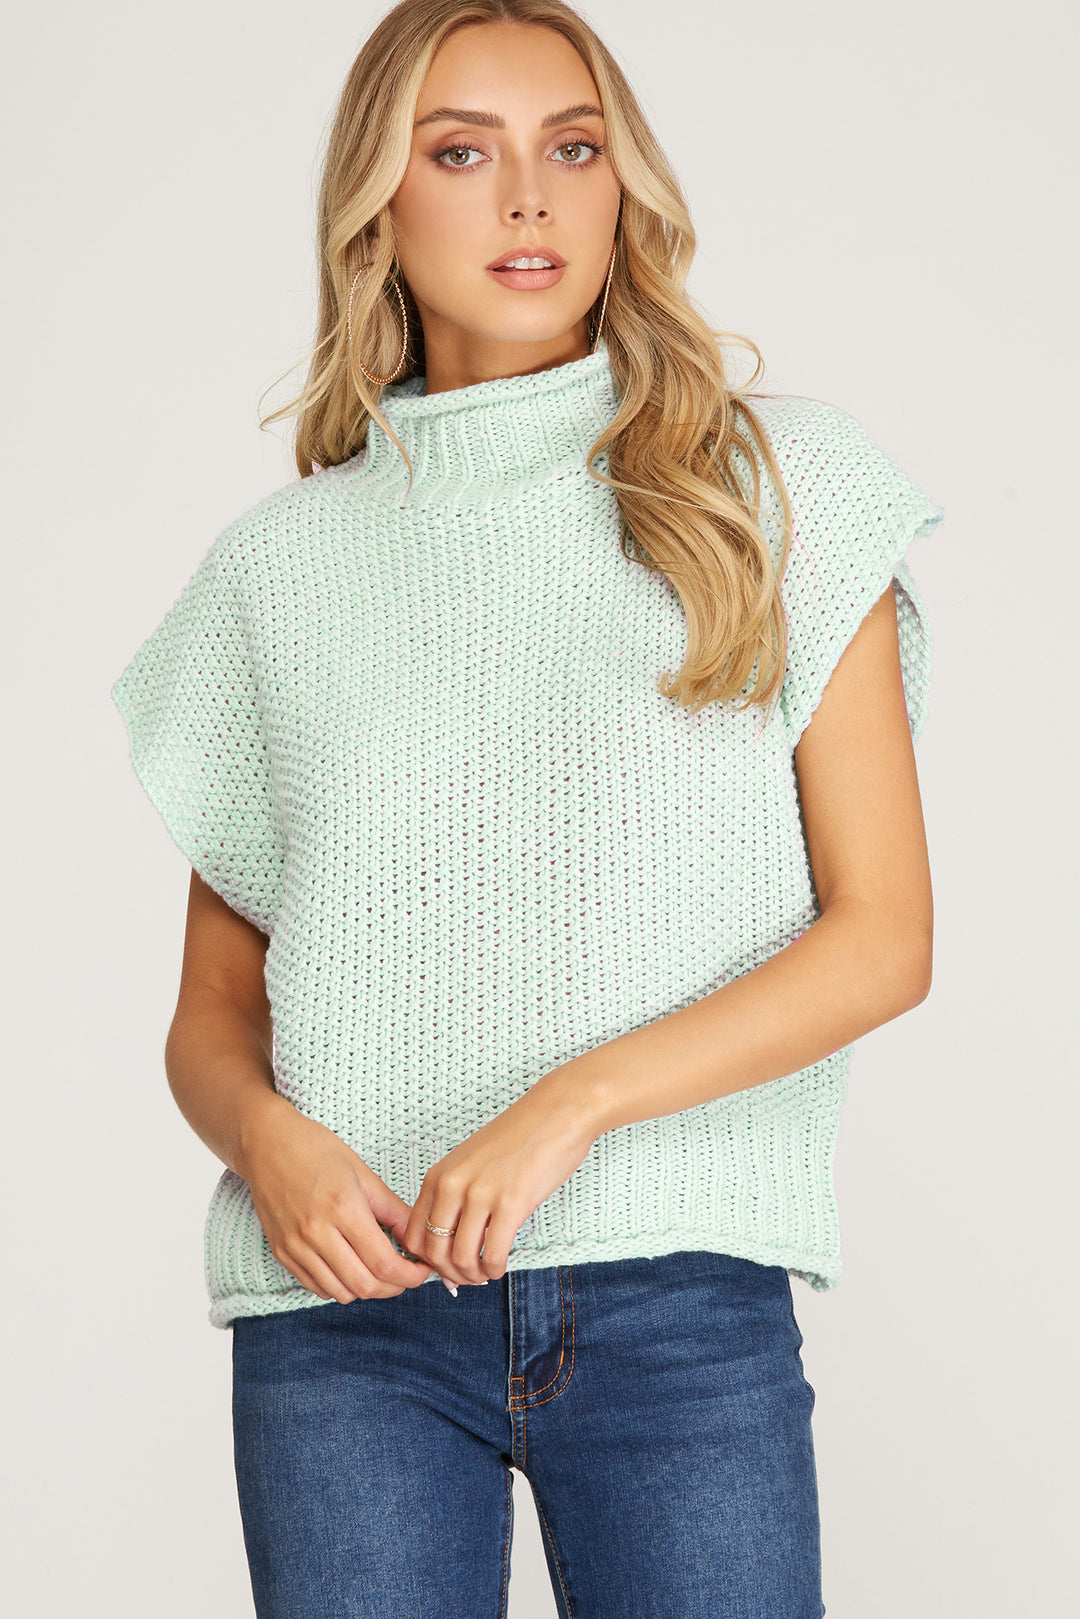 I Want Everything Sweater in Mint